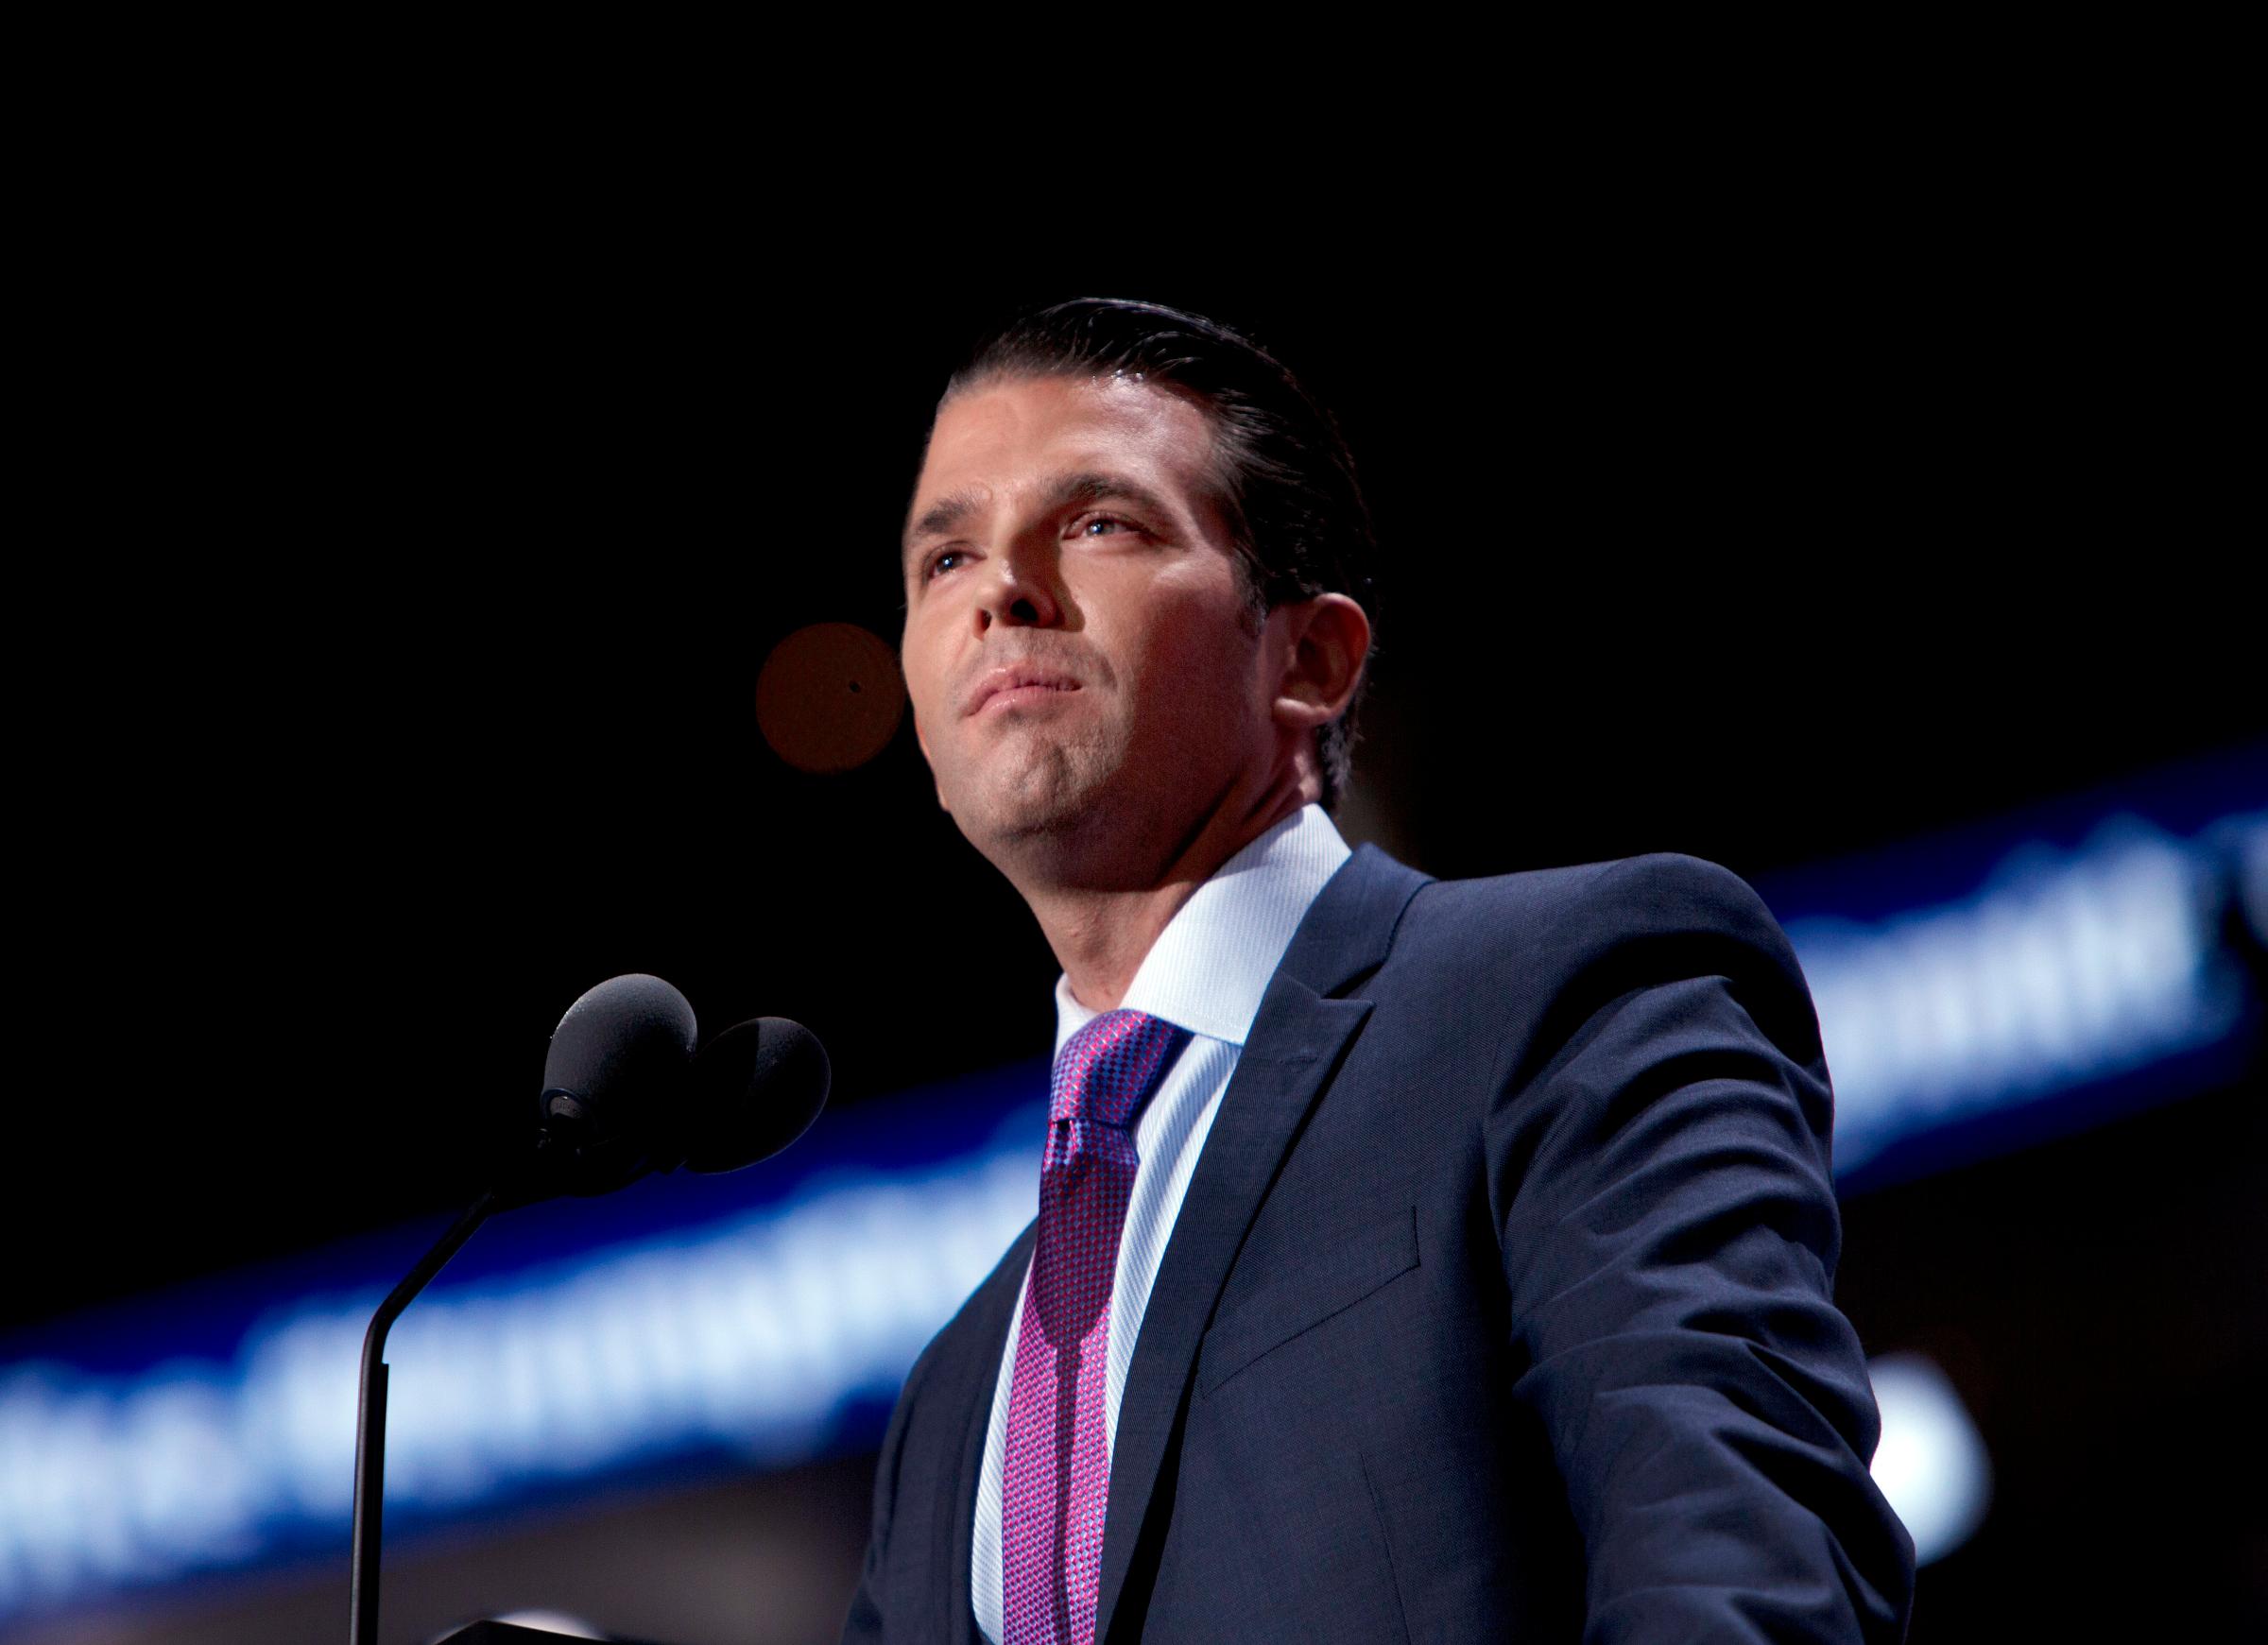 Donald Trump Jr. speaks at the Republican National Convention in Cleveland on Tuesday, July 19, 2016.